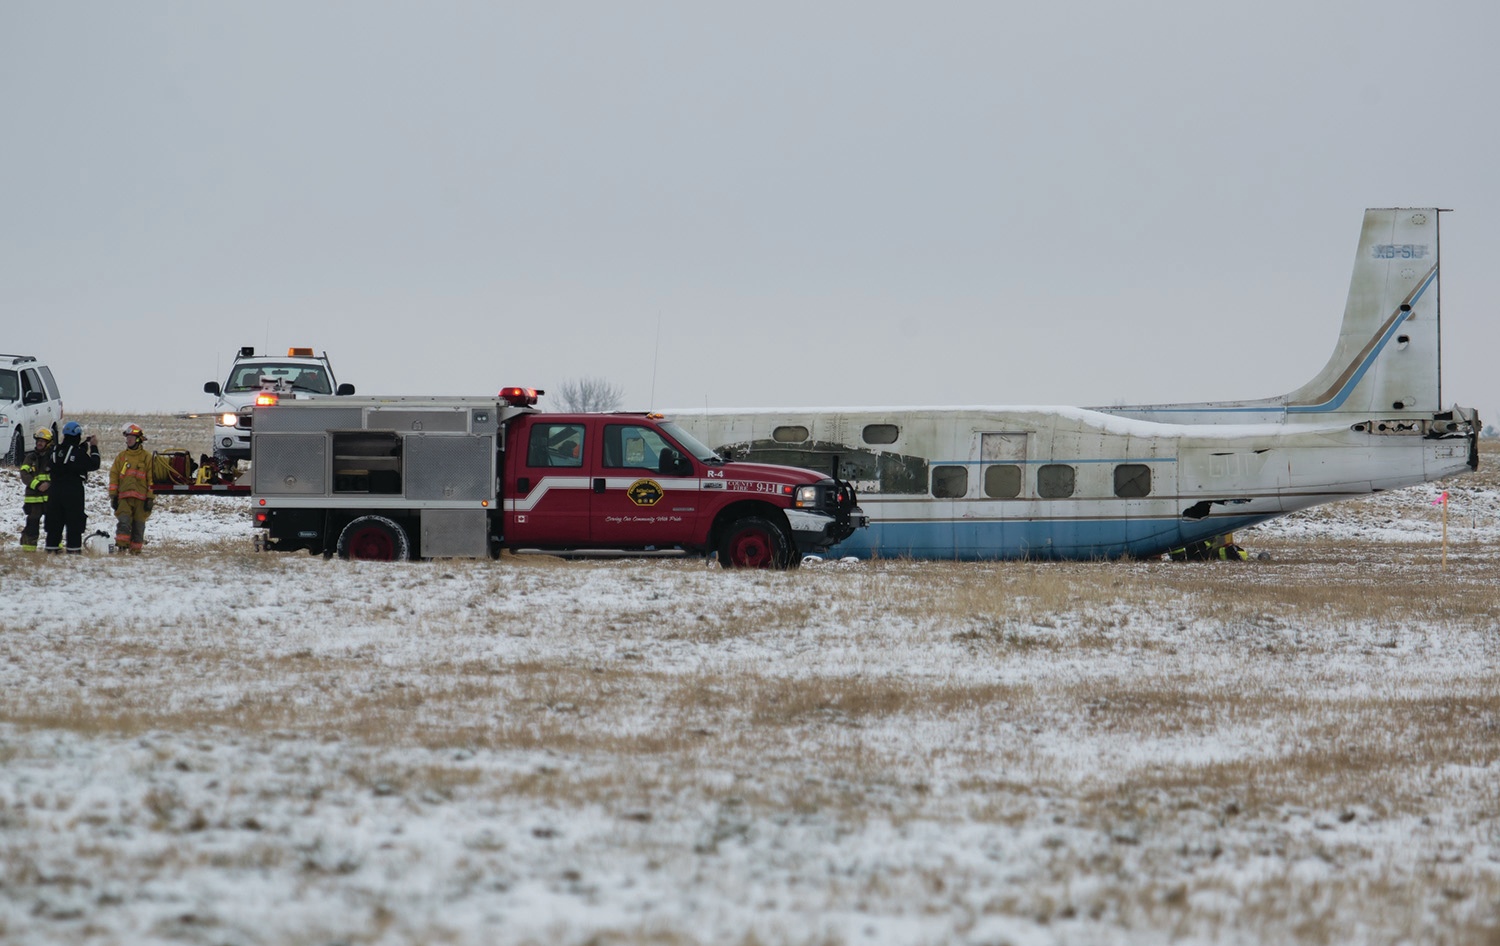 PRACTICE - The Red Deer Regional Airport Authority conducted an emergency exercise involving participation from first responders such as Red Deer County Fire